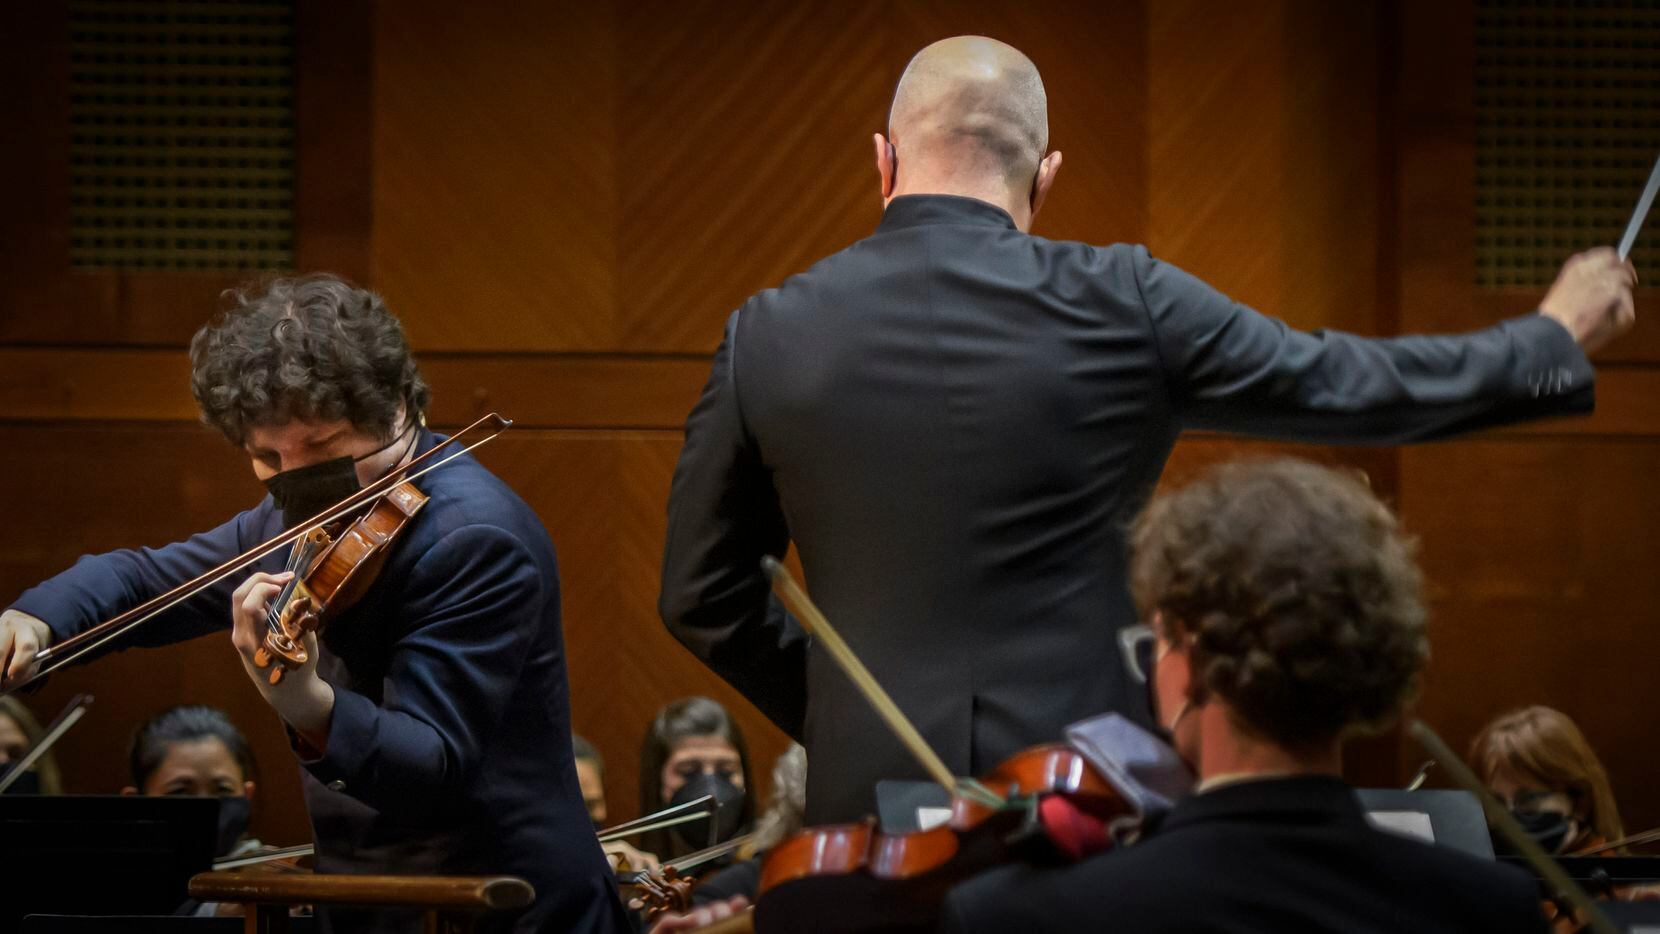 Violinist Augustin Hadelich performs Mendelssohn's Violin Concerto in E Minor with the Fort Worth Symphony Orchestra under the direction of guest conductor Carlo Montanaro at Bass Performance Hall in Fort Worth on Dec. 3, 2021.